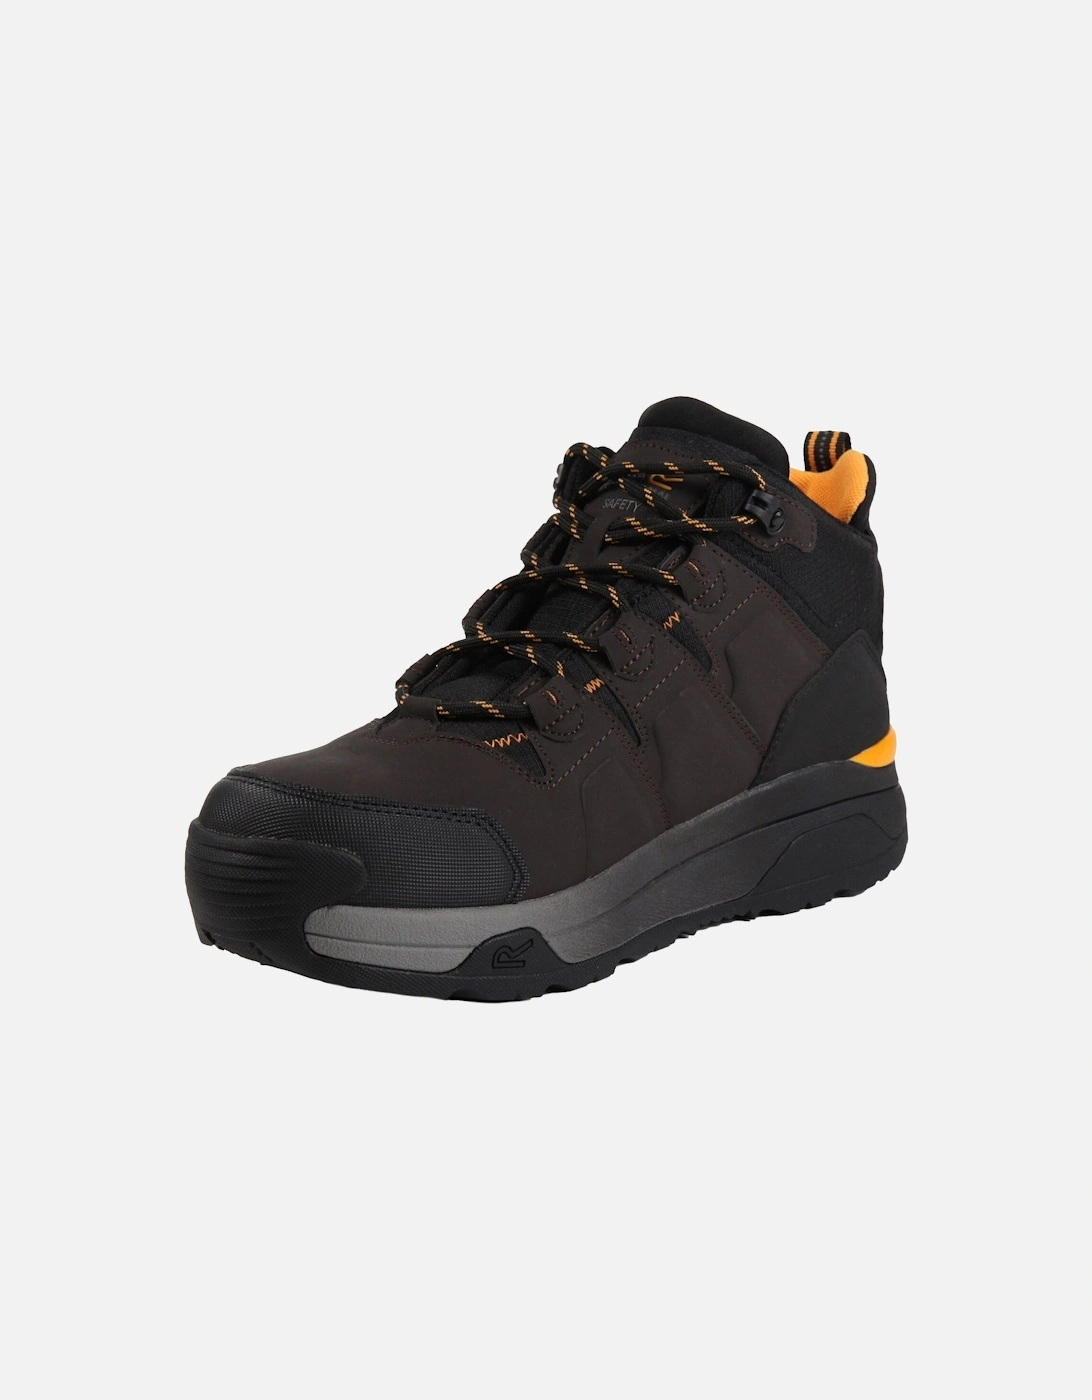 Mens Hyperfort Hiking Boots